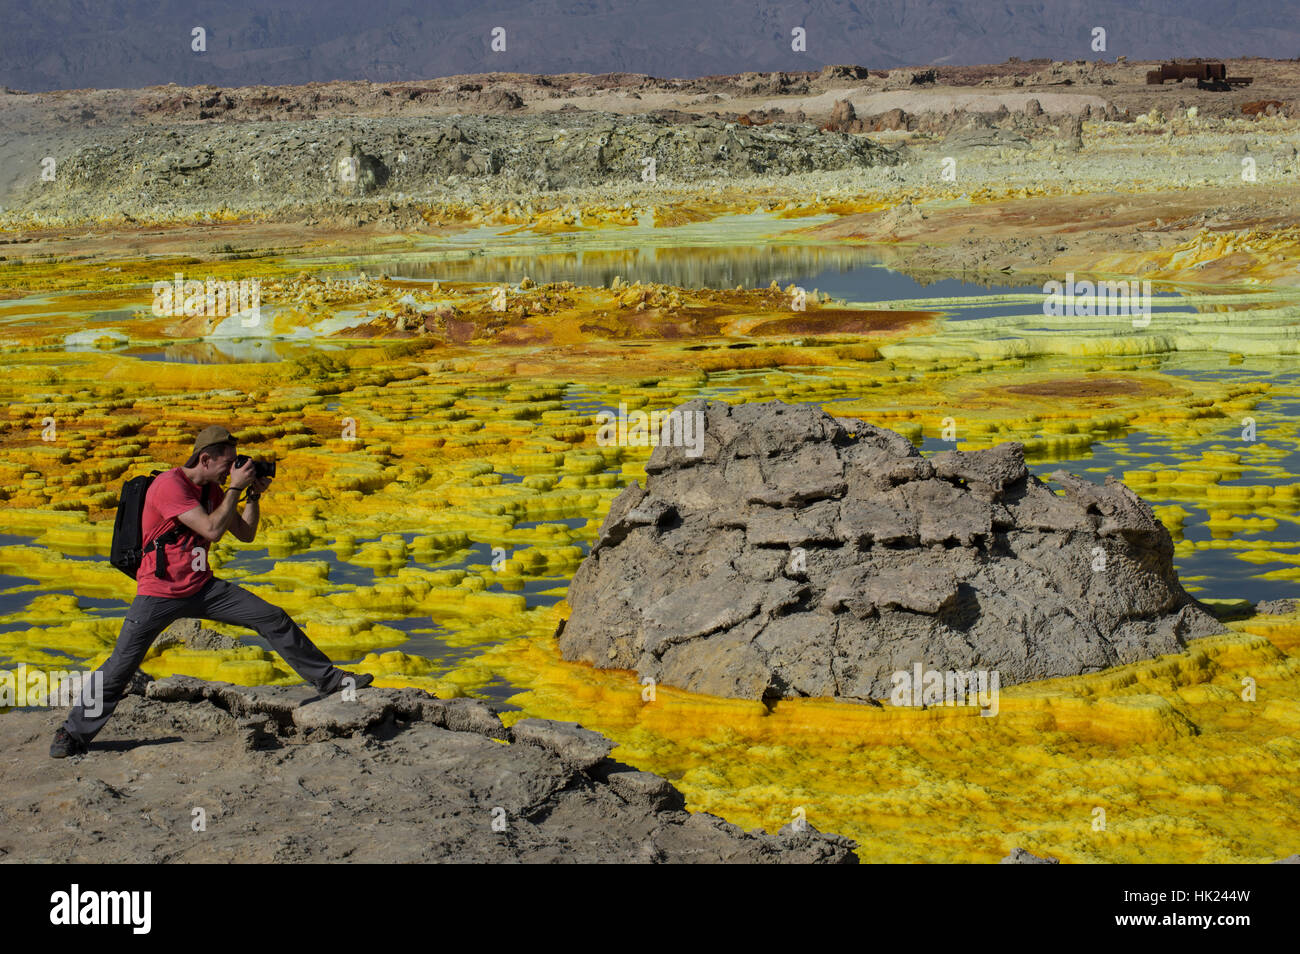 Photographer shooting the wild rock formations in the otherworldly scenery of Dalol, Ethiopia in the Danakil Depression desert Stock Photo